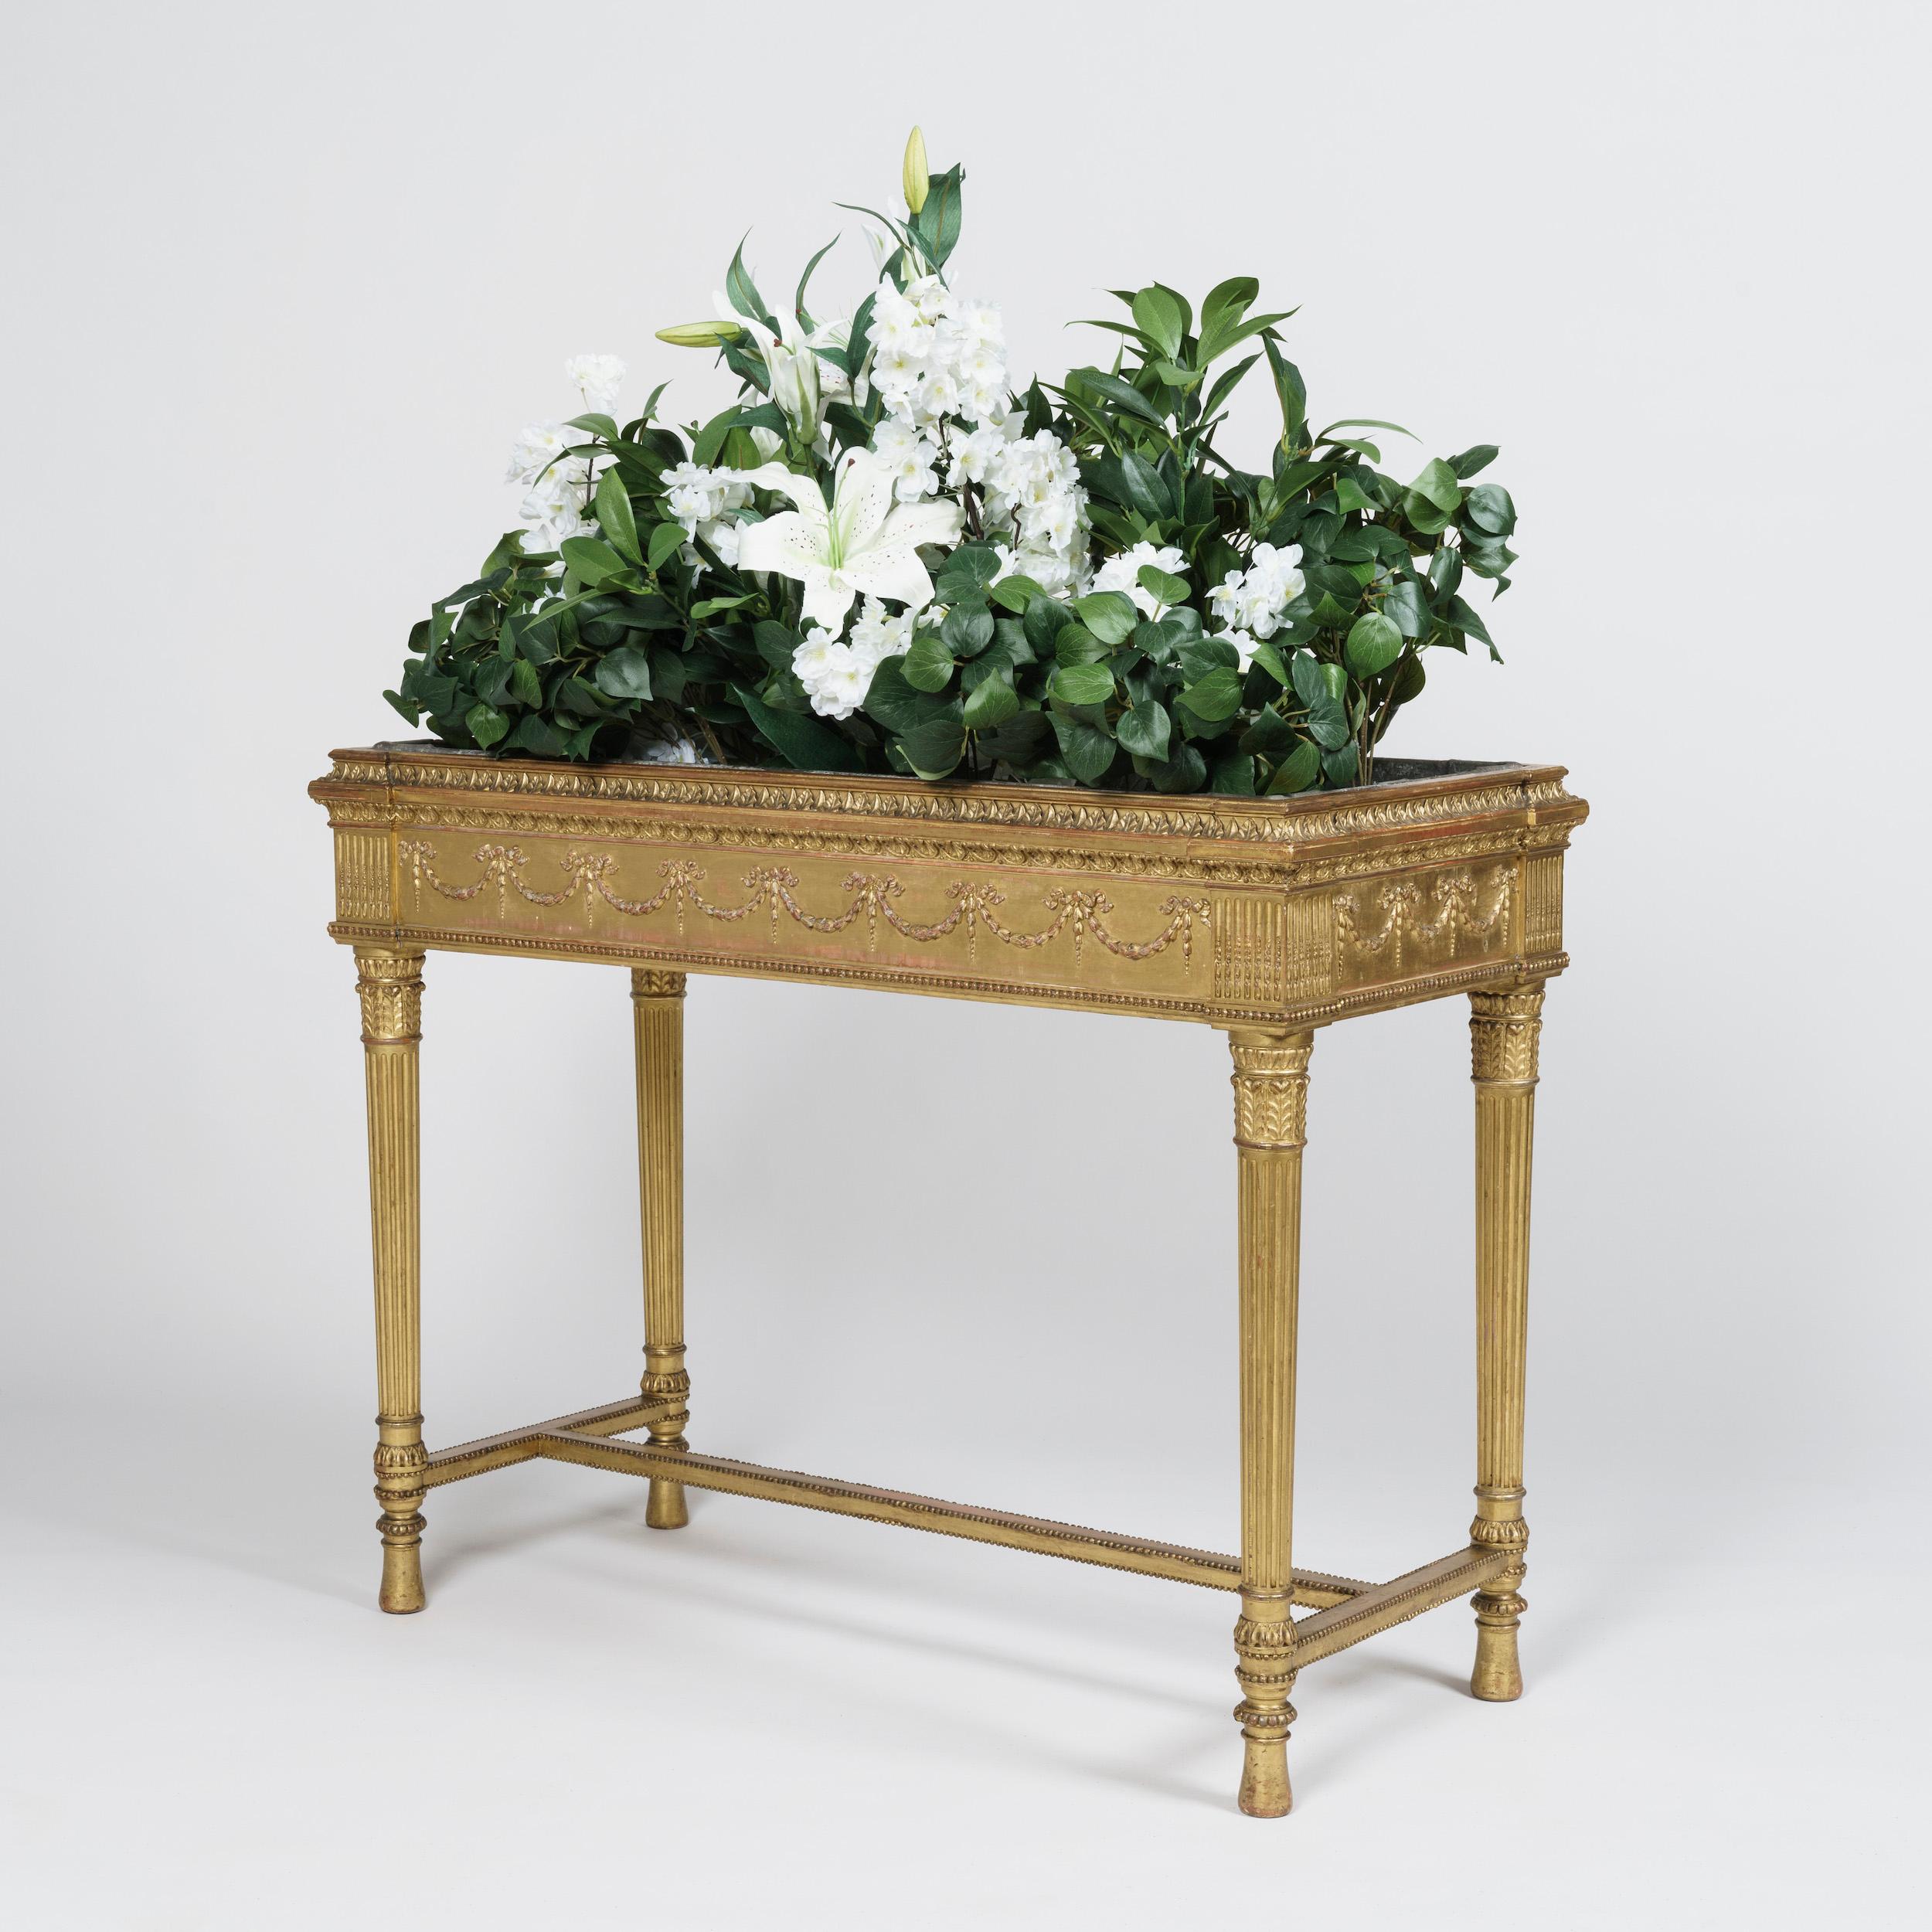 Gilt Pair of Neoclassical Carved and Gilded Planters